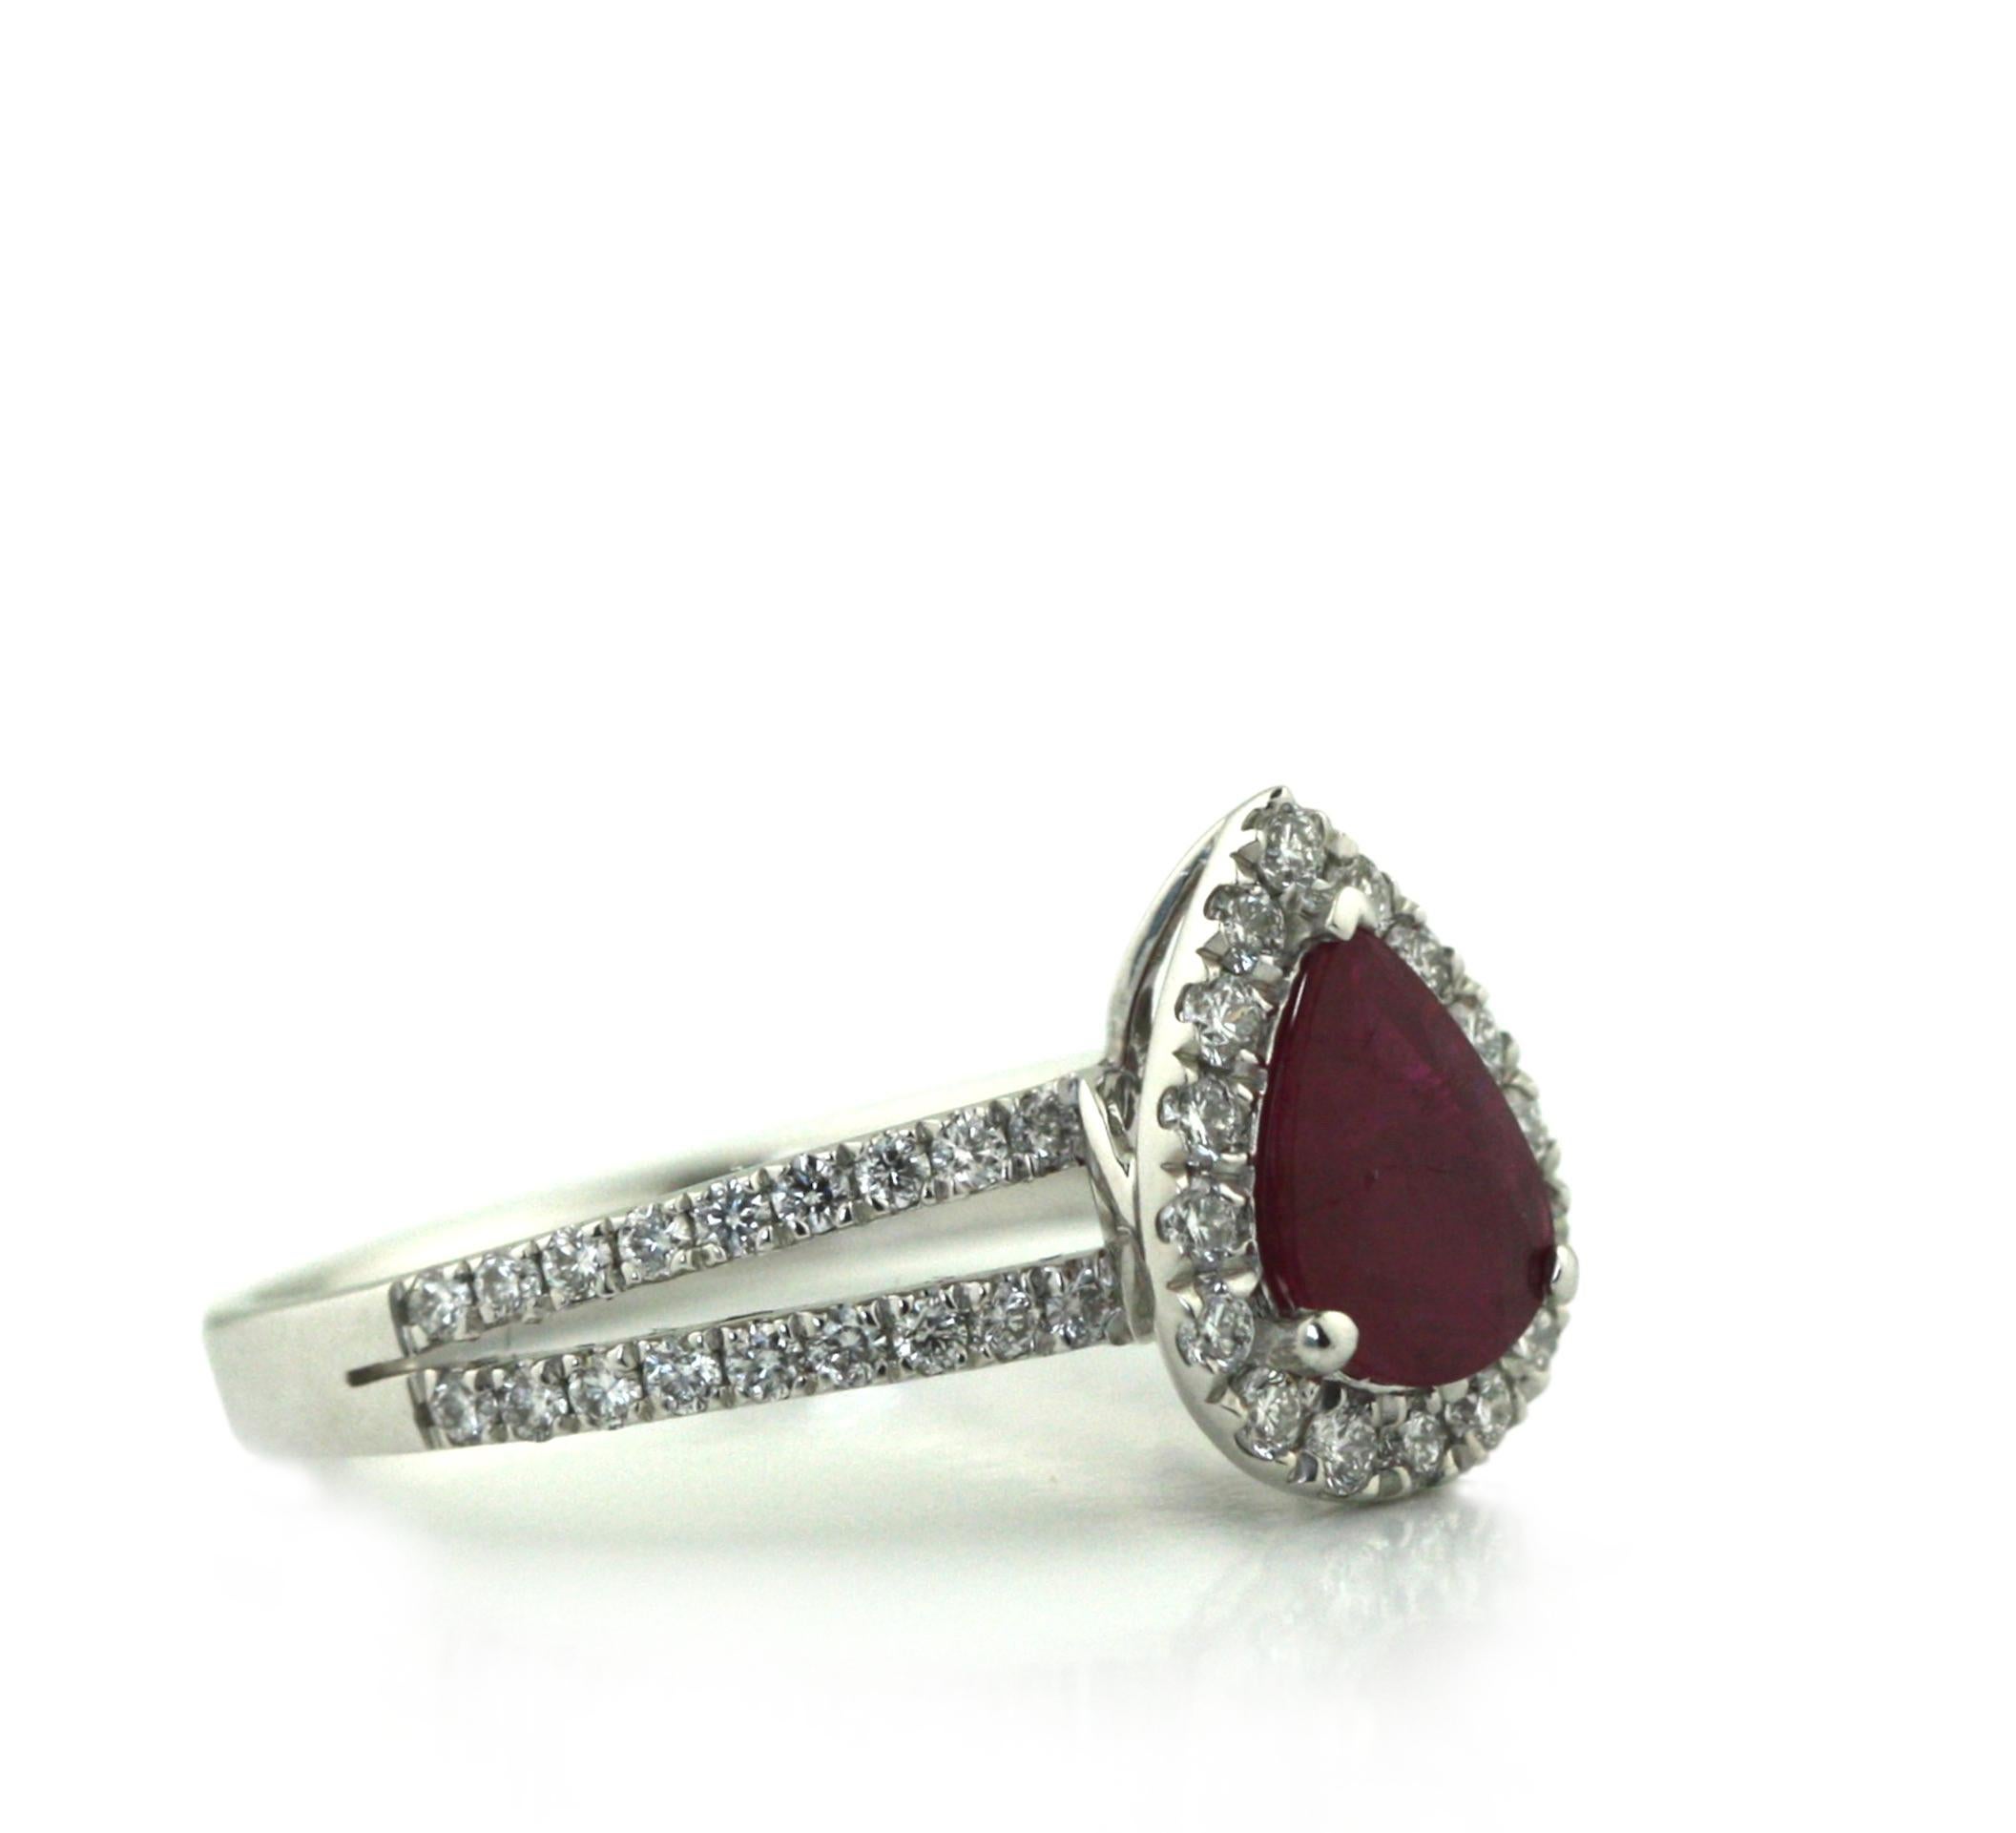 
Platinum Ruby and Diamond Ring
Featuring a Pear-shaped Purplish Red Ruby
Weighing 0.95 carats
Within a surround of 52 round, brilliant-cut diamonds total approximate weight 6.7 grams
Accompanied by GIA Report 2225075675 dated October 15, 2021